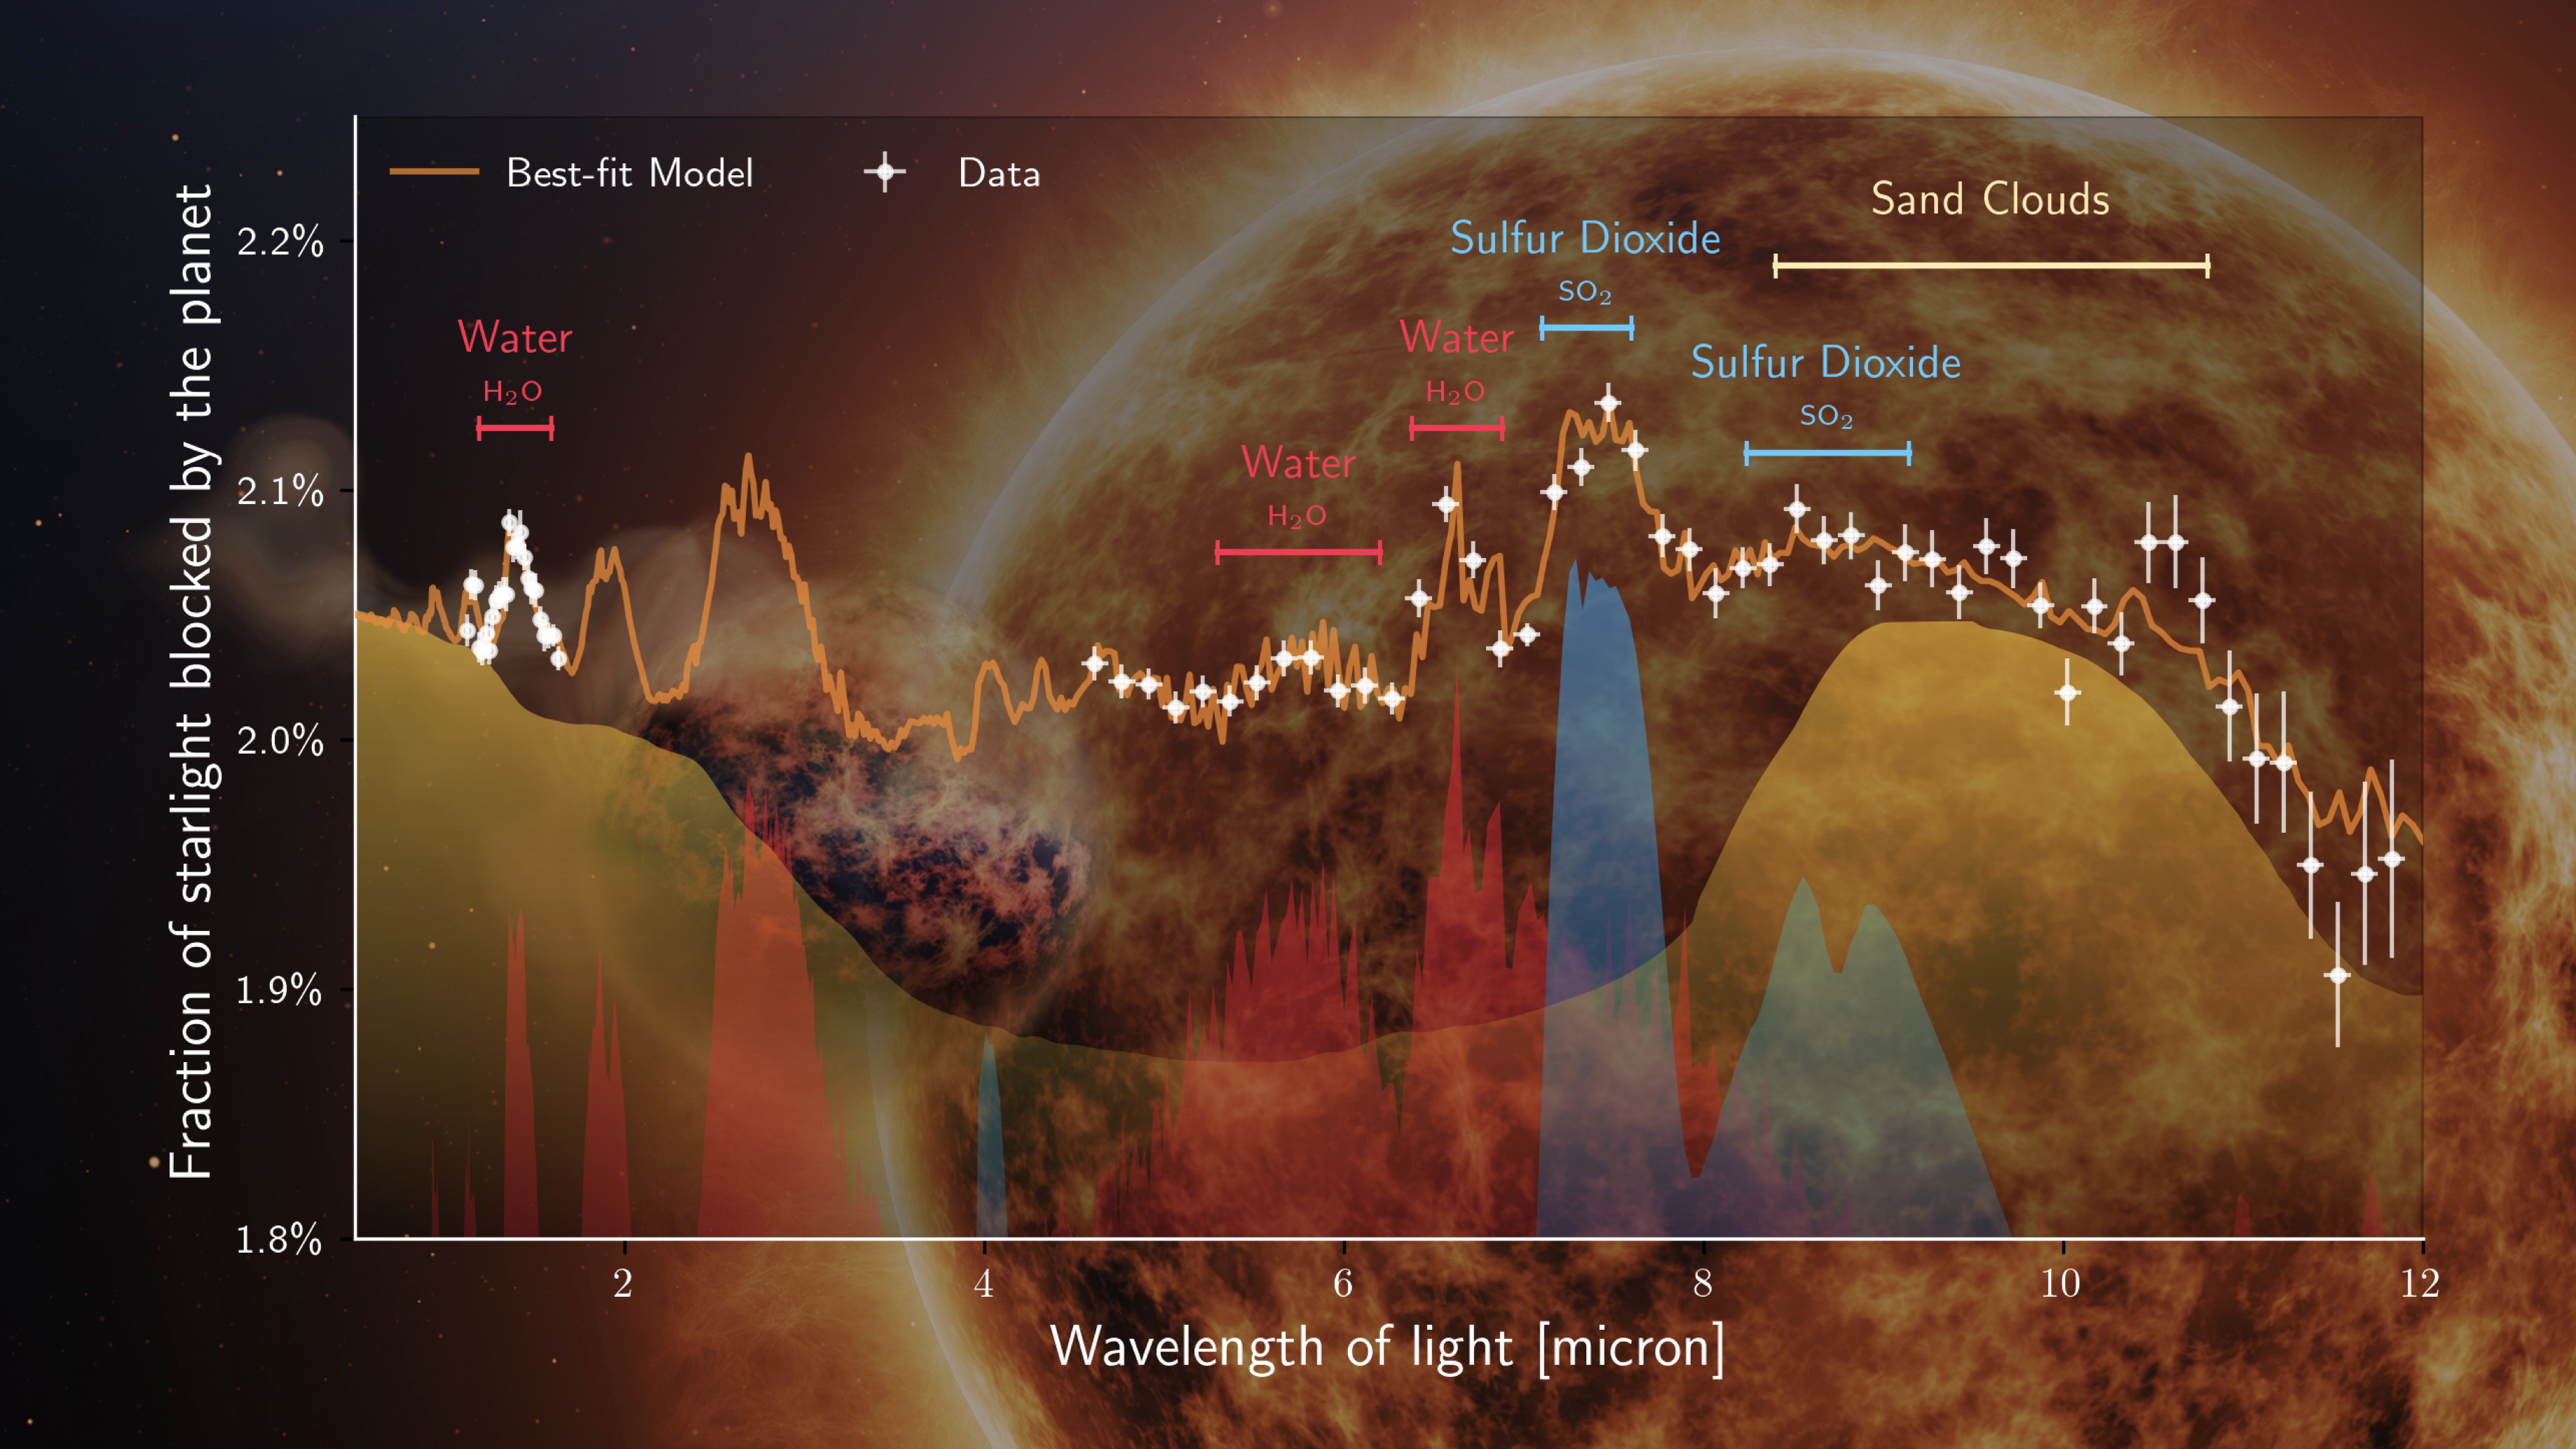 The chemical composition of the atmosphere of WASP-107b, captured by JWST's MIRI instrument